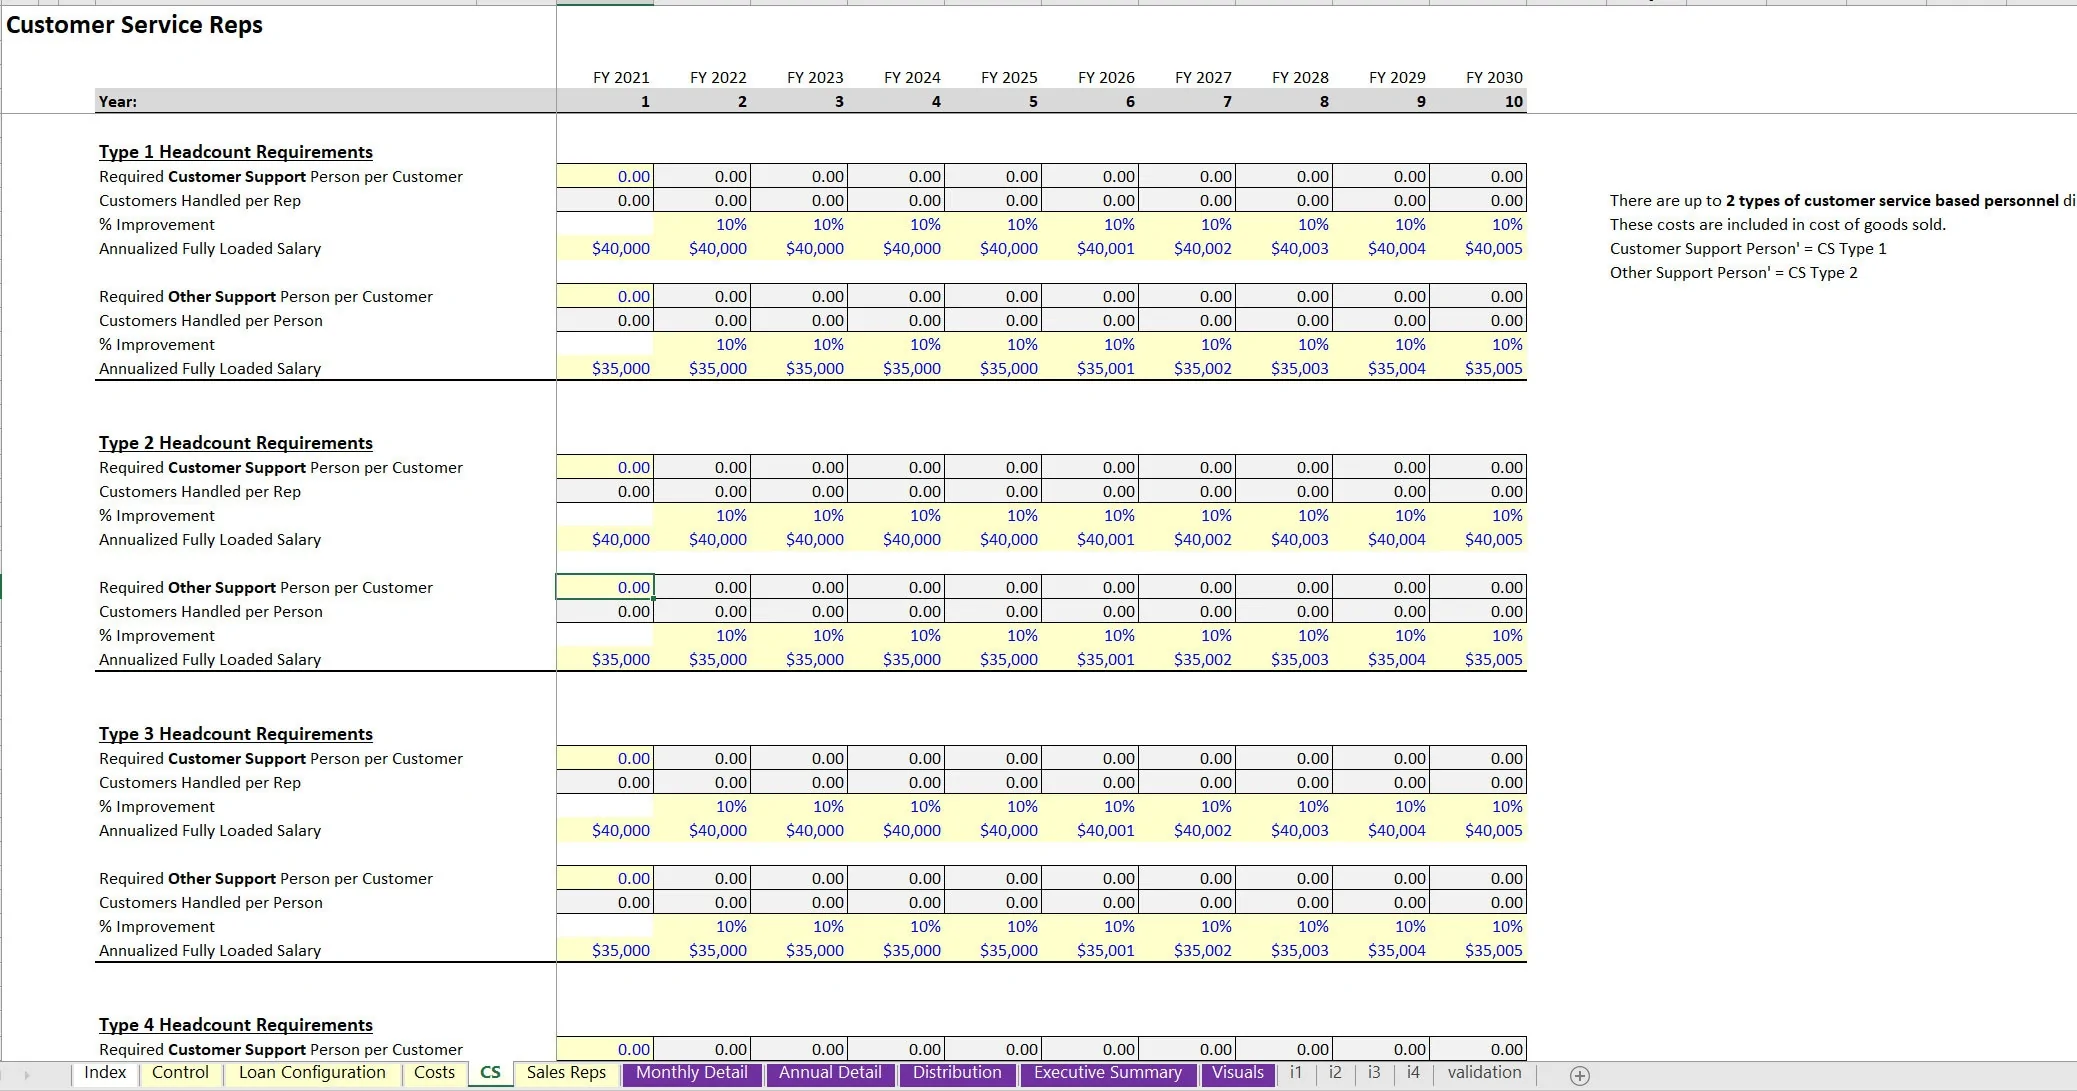 This is a partial preview of Flat Fee Money Lending Business Financial Model (Excel workbook (XLSX)). 